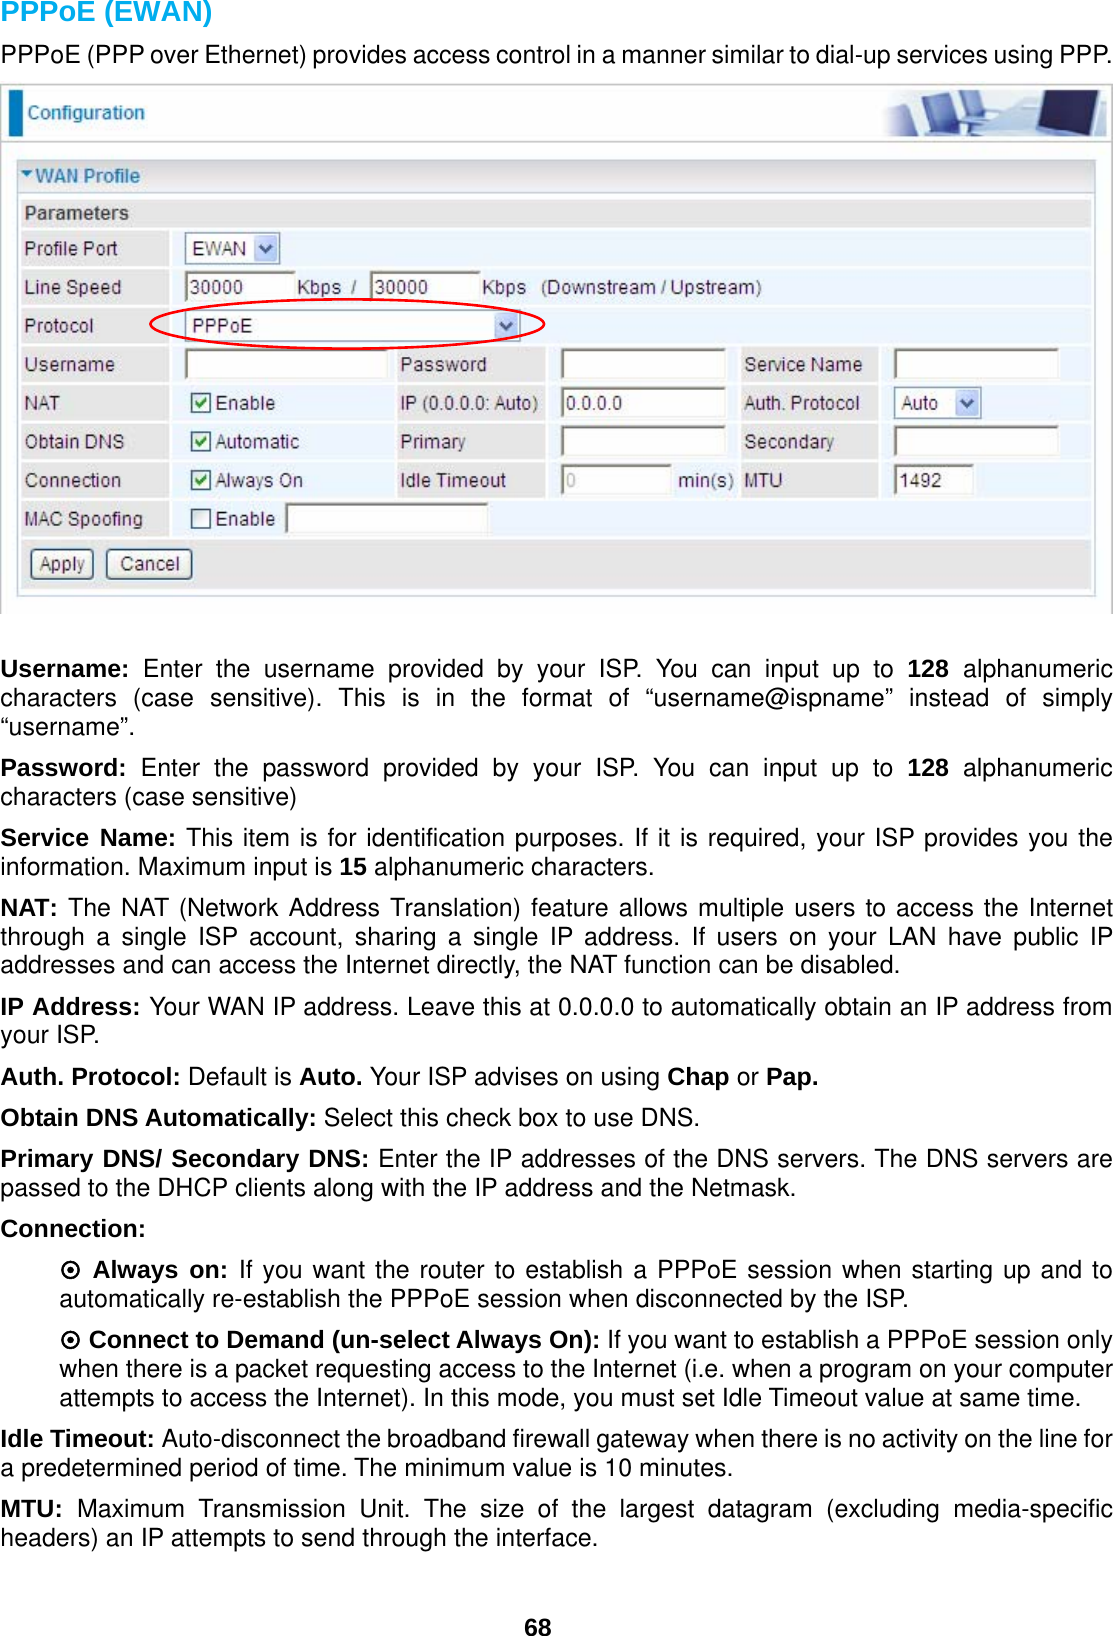  68 PPPoE (EWAN) PPPoE (PPP over Ethernet) provides access control in a manner similar to dial-up services using PPP.   Username: Enter the username provided by your ISP. You can input up to 128  alphanumeric characters (case sensitive). This is in the format of “username@ispname” instead of simply “username”. Password: Enter the password provided by your ISP. You can input up to 128 alphanumeric characters (case sensitive) Service Name: This item is for identification purposes. If it is required, your ISP provides you the information. Maximum input is 15 alphanumeric characters. NAT: The NAT (Network Address Translation) feature allows multiple users to access the Internet through a single ISP account, sharing a single IP address. If users on your LAN have public IP addresses and can access the Internet directly, the NAT function can be disabled. IP Address: Your WAN IP address. Leave this at 0.0.0.0 to automatically obtain an IP address from your ISP. Auth. Protocol: Default is Auto. Your ISP advises on using Chap or Pap. Obtain DNS Automatically: Select this check box to use DNS. Primary DNS/ Secondary DNS: Enter the IP addresses of the DNS servers. The DNS servers are passed to the DHCP clients along with the IP address and the Netmask. Connection:  ~ Always on: If you want the router to establish a PPPoE session when starting up and to automatically re-establish the PPPoE session when disconnected by the ISP. ~ Connect to Demand (un-select Always On): If you want to establish a PPPoE session only when there is a packet requesting access to the Internet (i.e. when a program on your computer attempts to access the Internet). In this mode, you must set Idle Timeout value at same time. Idle Timeout: Auto-disconnect the broadband firewall gateway when there is no activity on the line for a predetermined period of time. The minimum value is 10 minutes. MTU:  Maximum Transmission Unit. The size of the largest datagram (excluding media-specific headers) an IP attempts to send through the interface.  